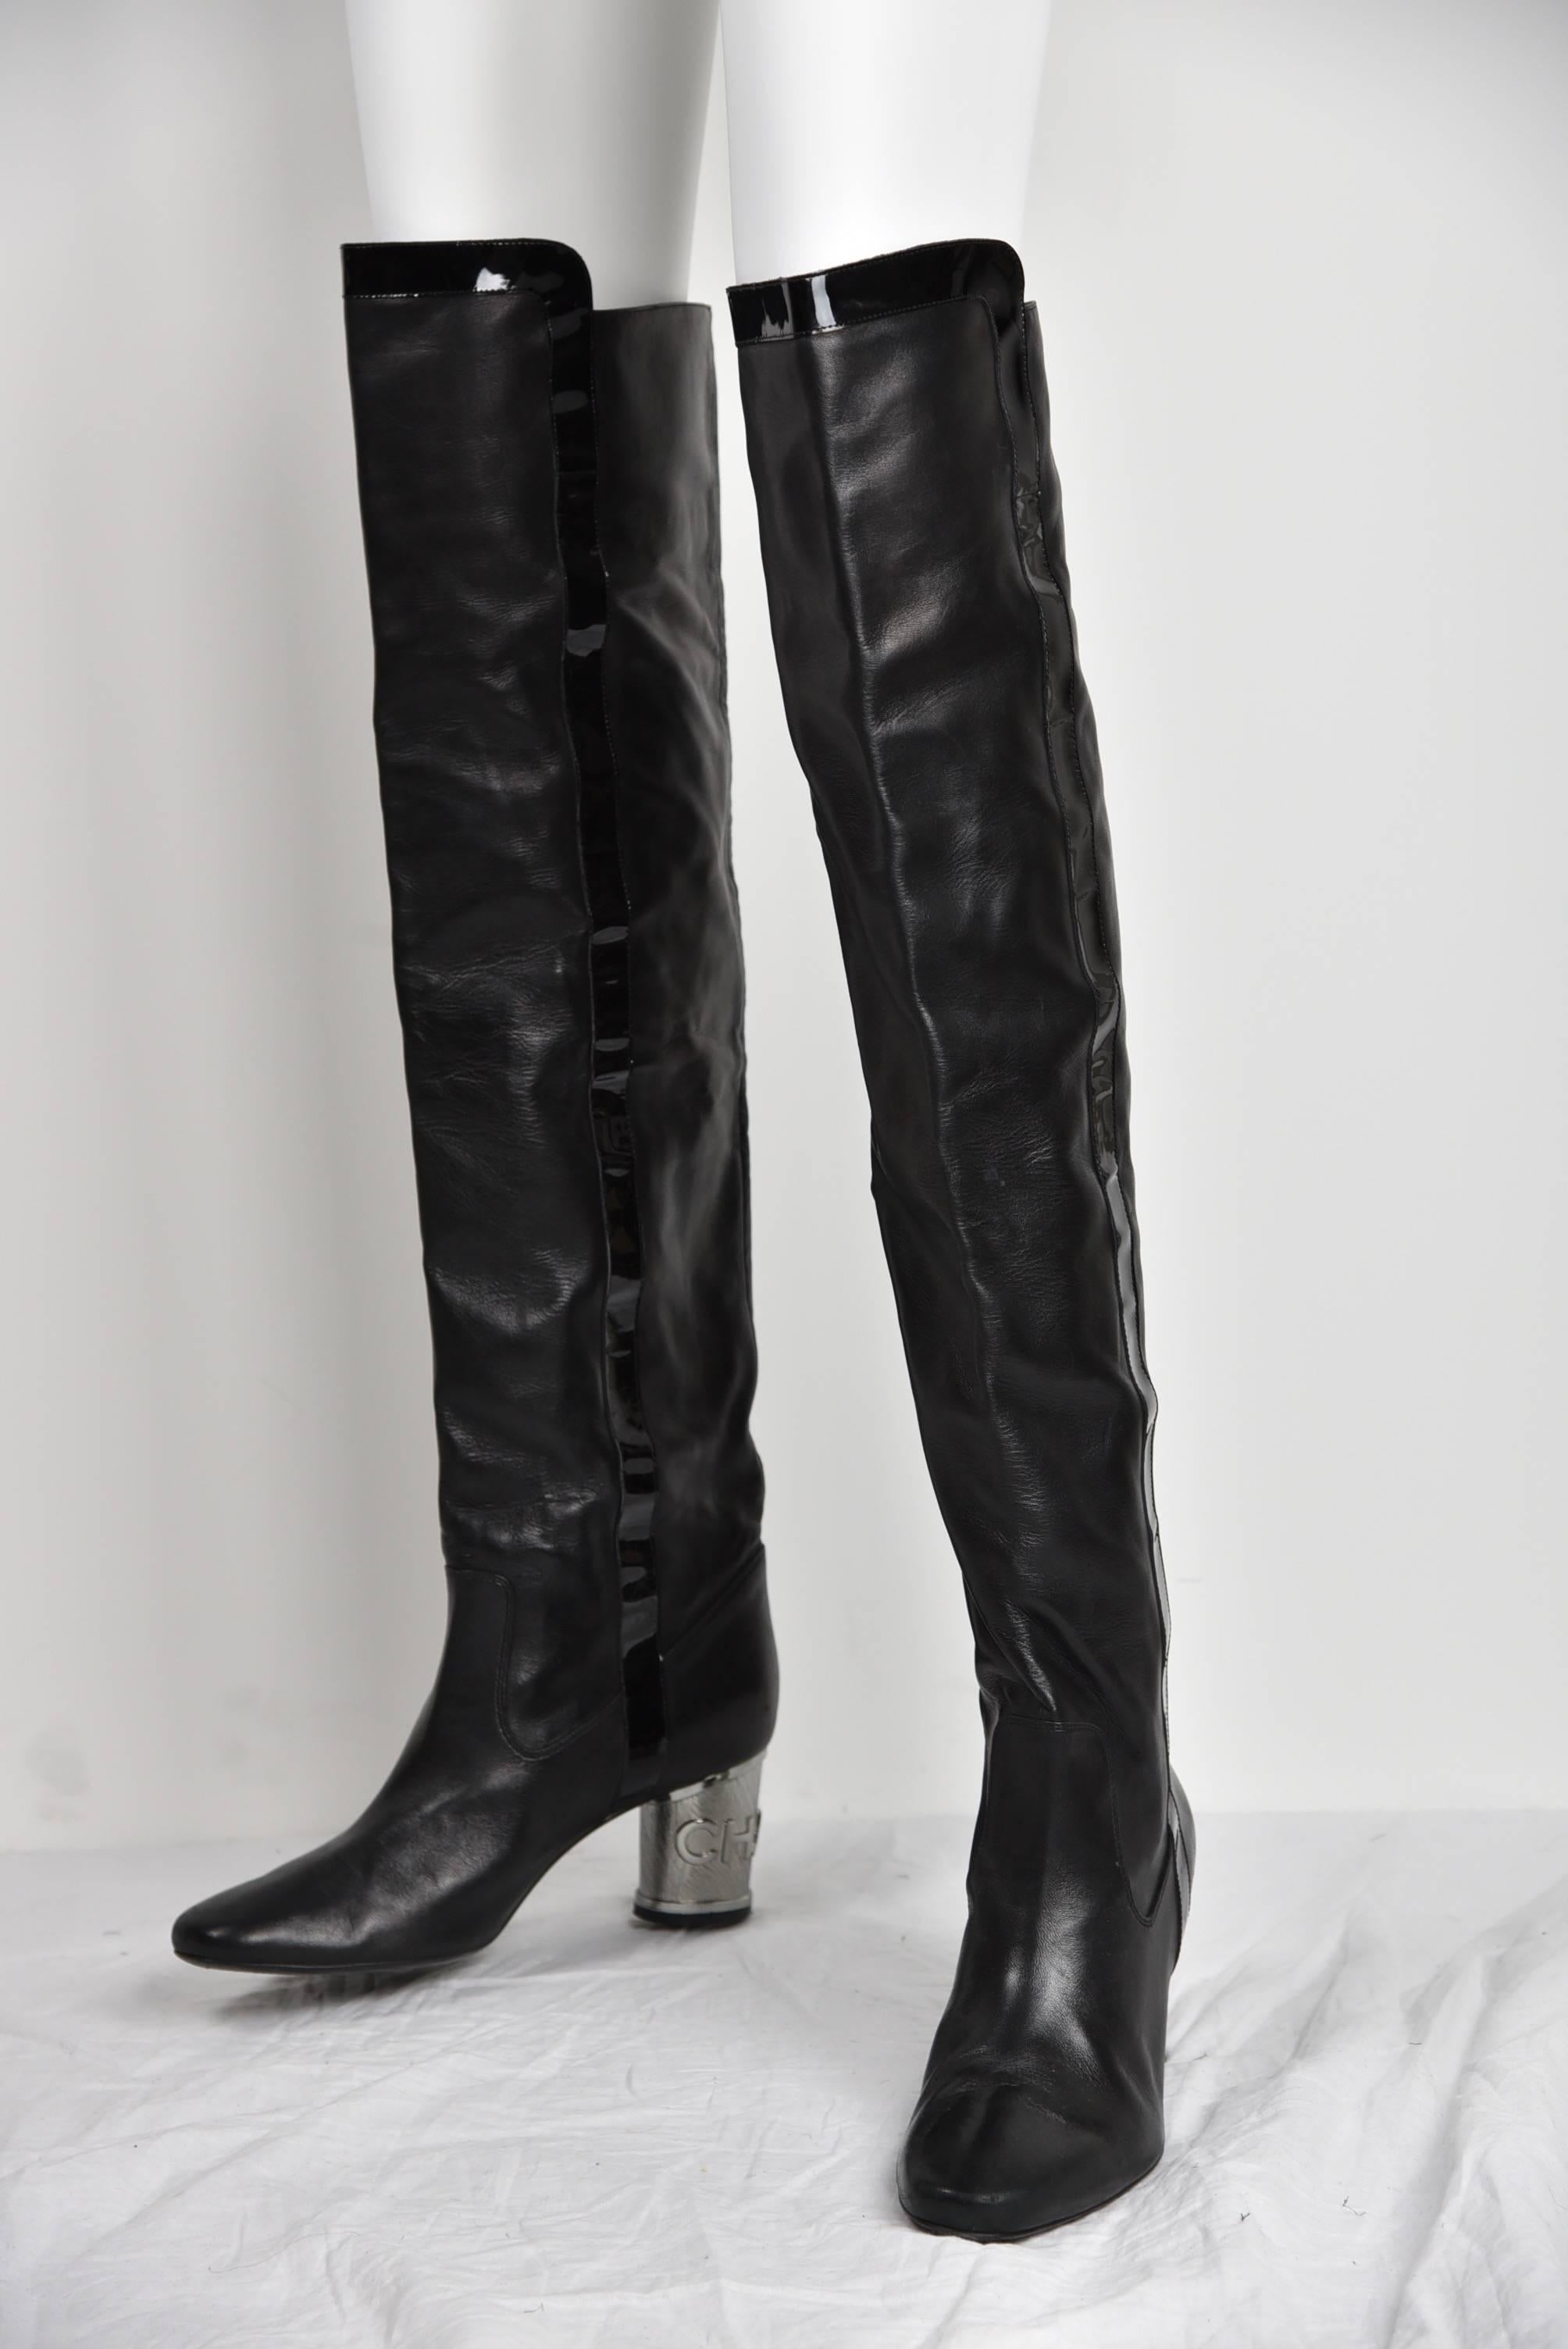 Chanel Circa 2000 Black Over the Knee Height Boots with Silver Chanel Heels FR41 For Sale 1